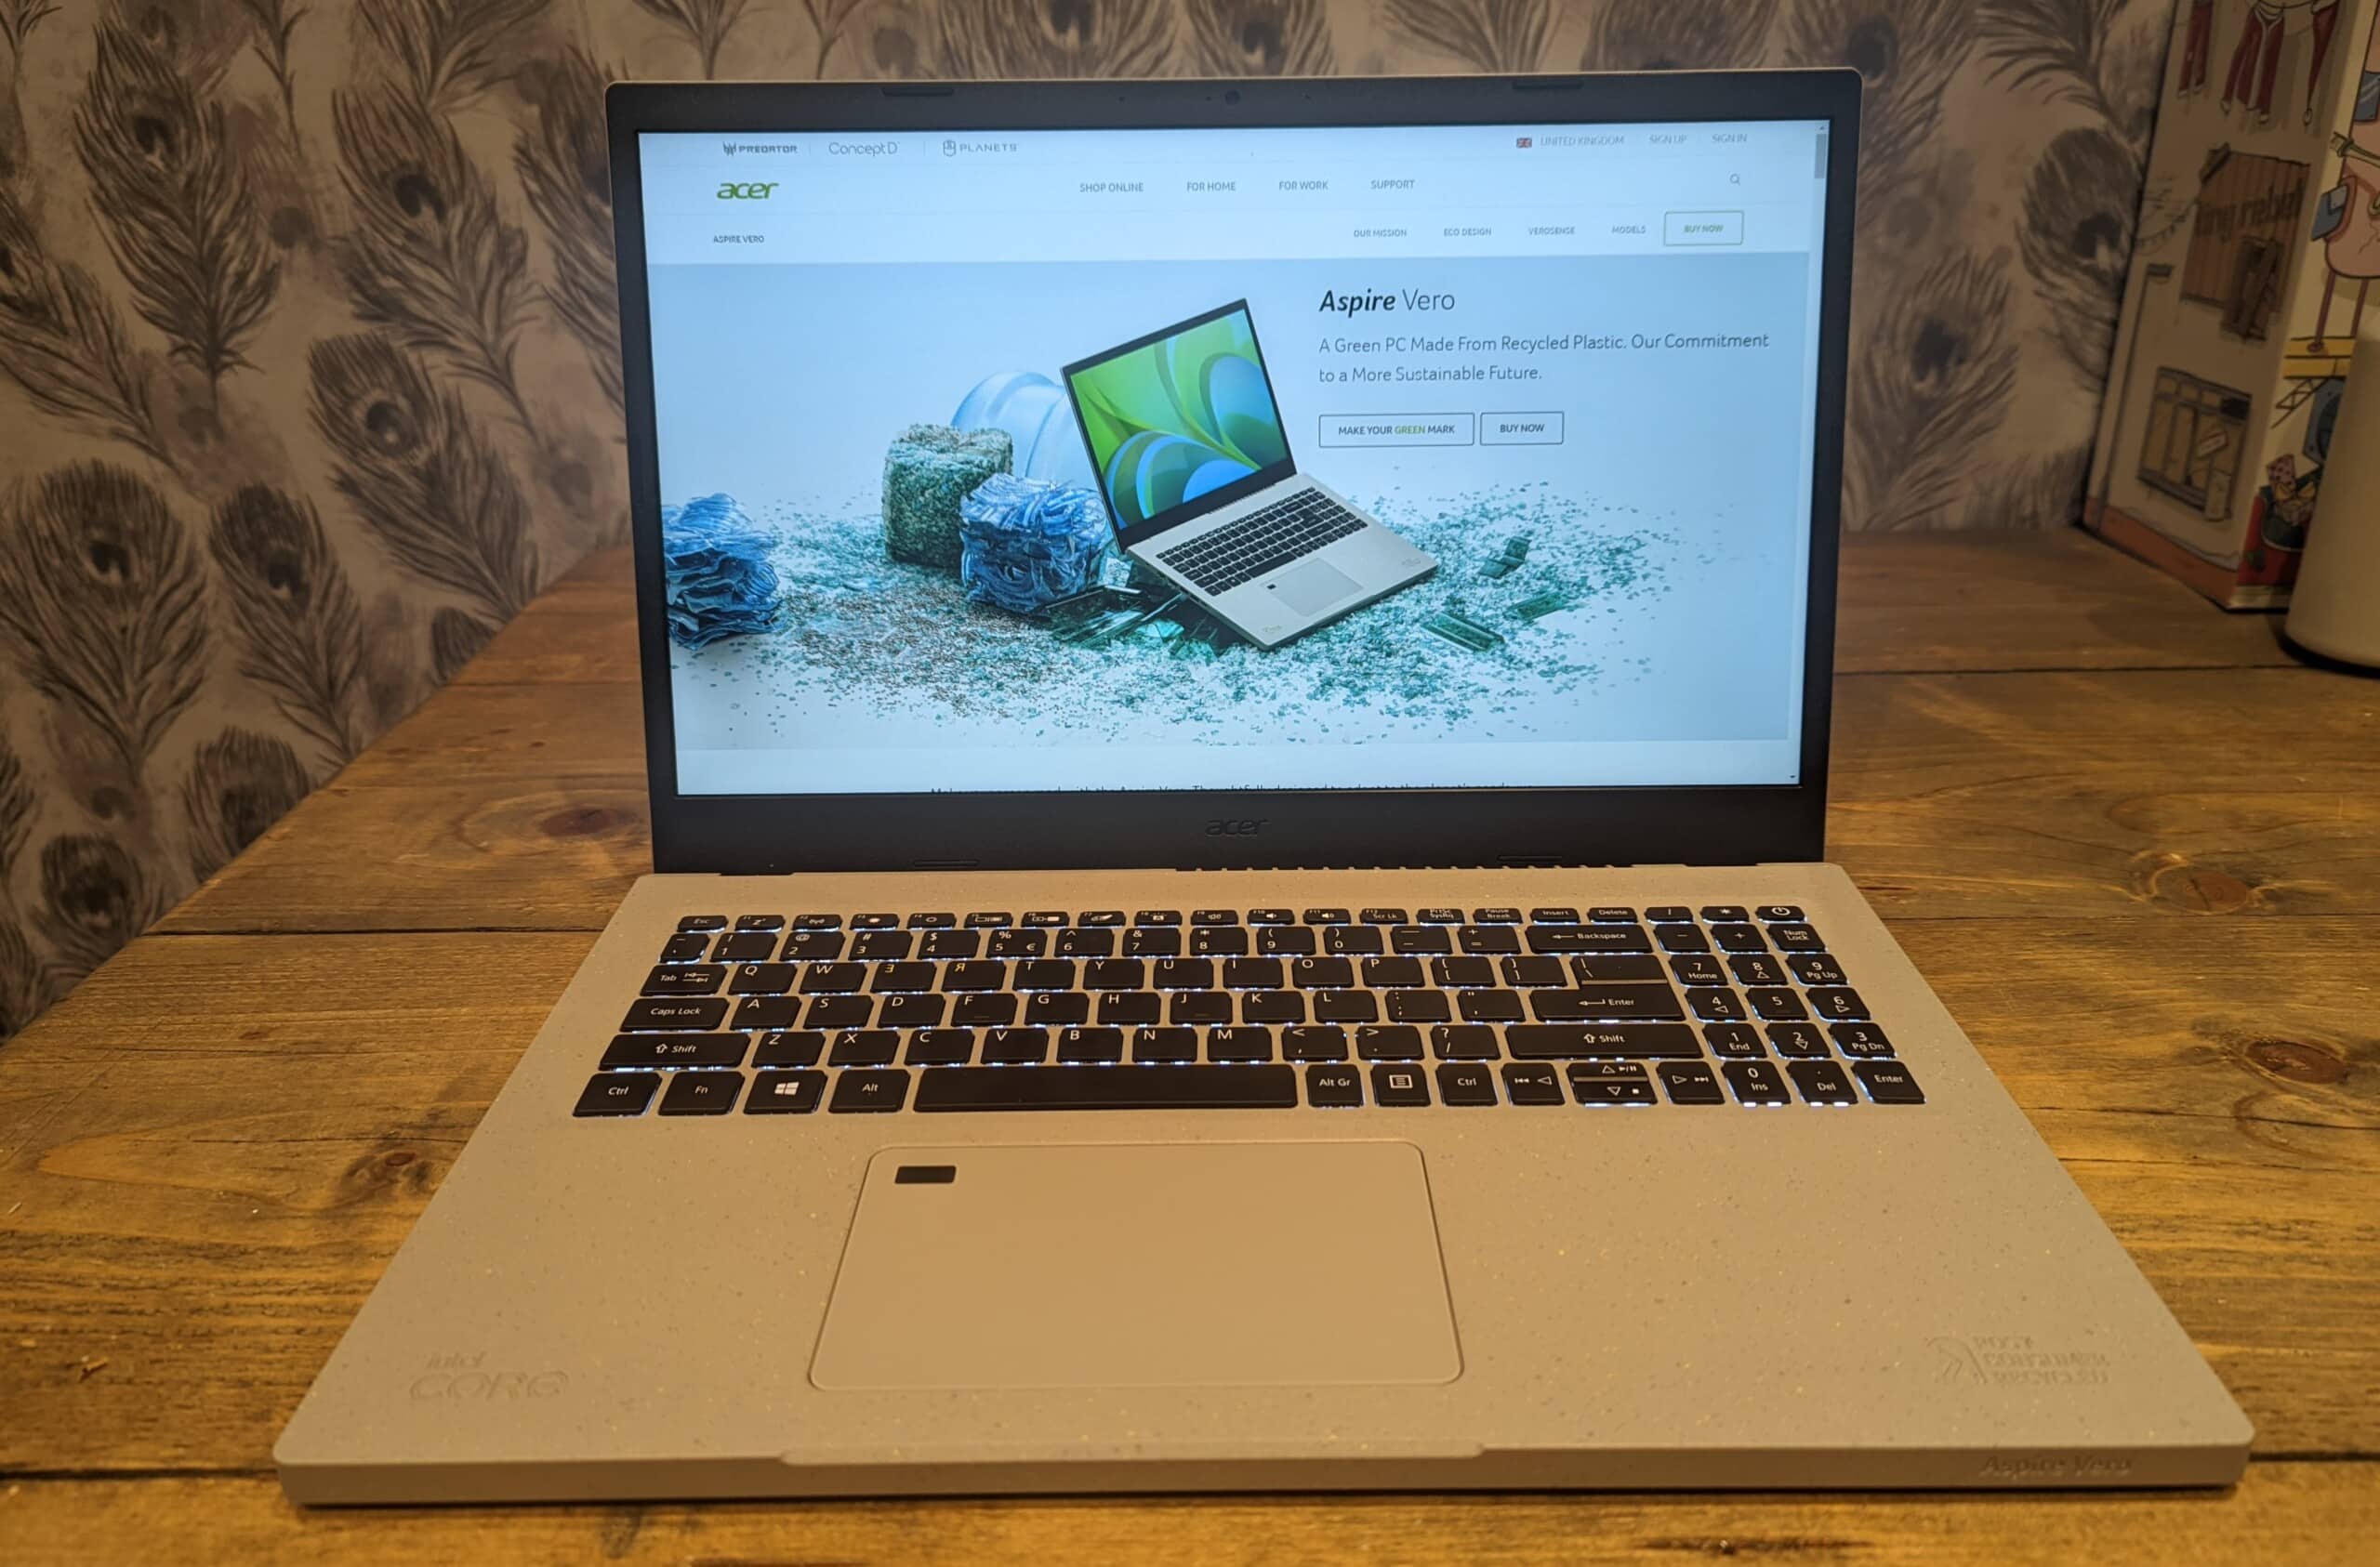 Acer Aspire Vero Laptop Review: Serviceable design makes this easy to fix or upgrade